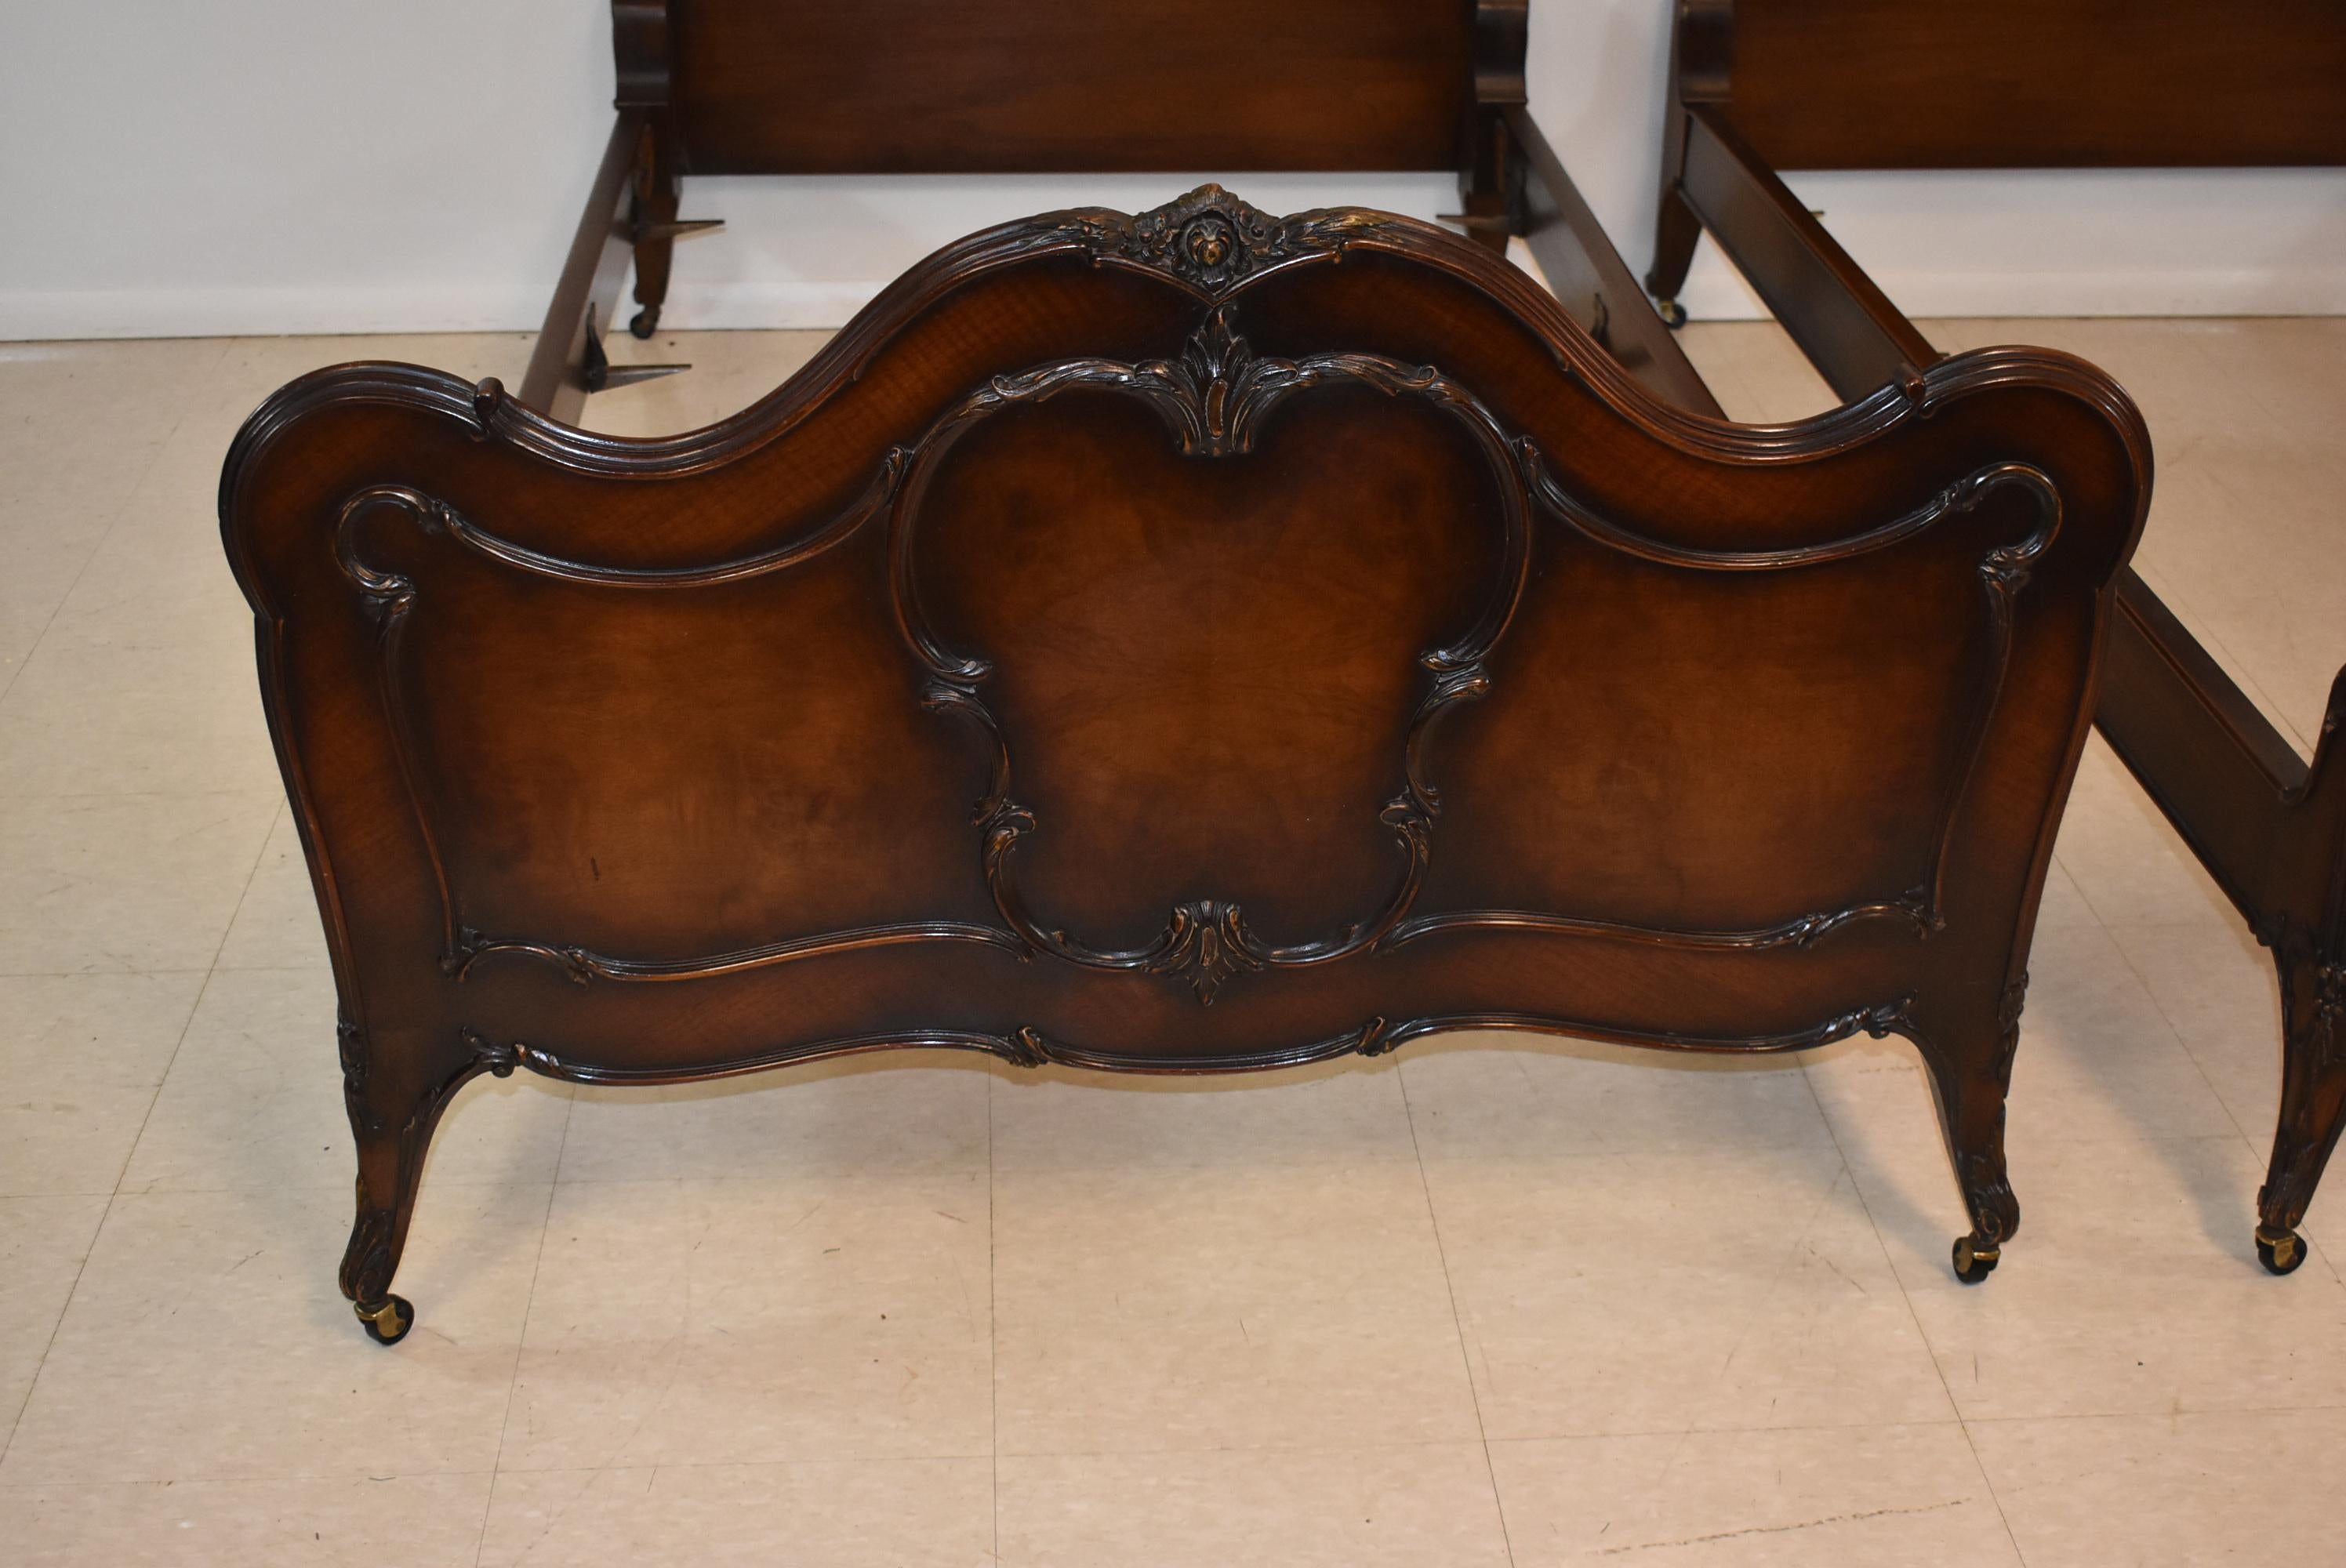 Pair of French Louie XV style walnut twin bed frames by Irwin Furniture. Figured walnut panels with applied carvings.